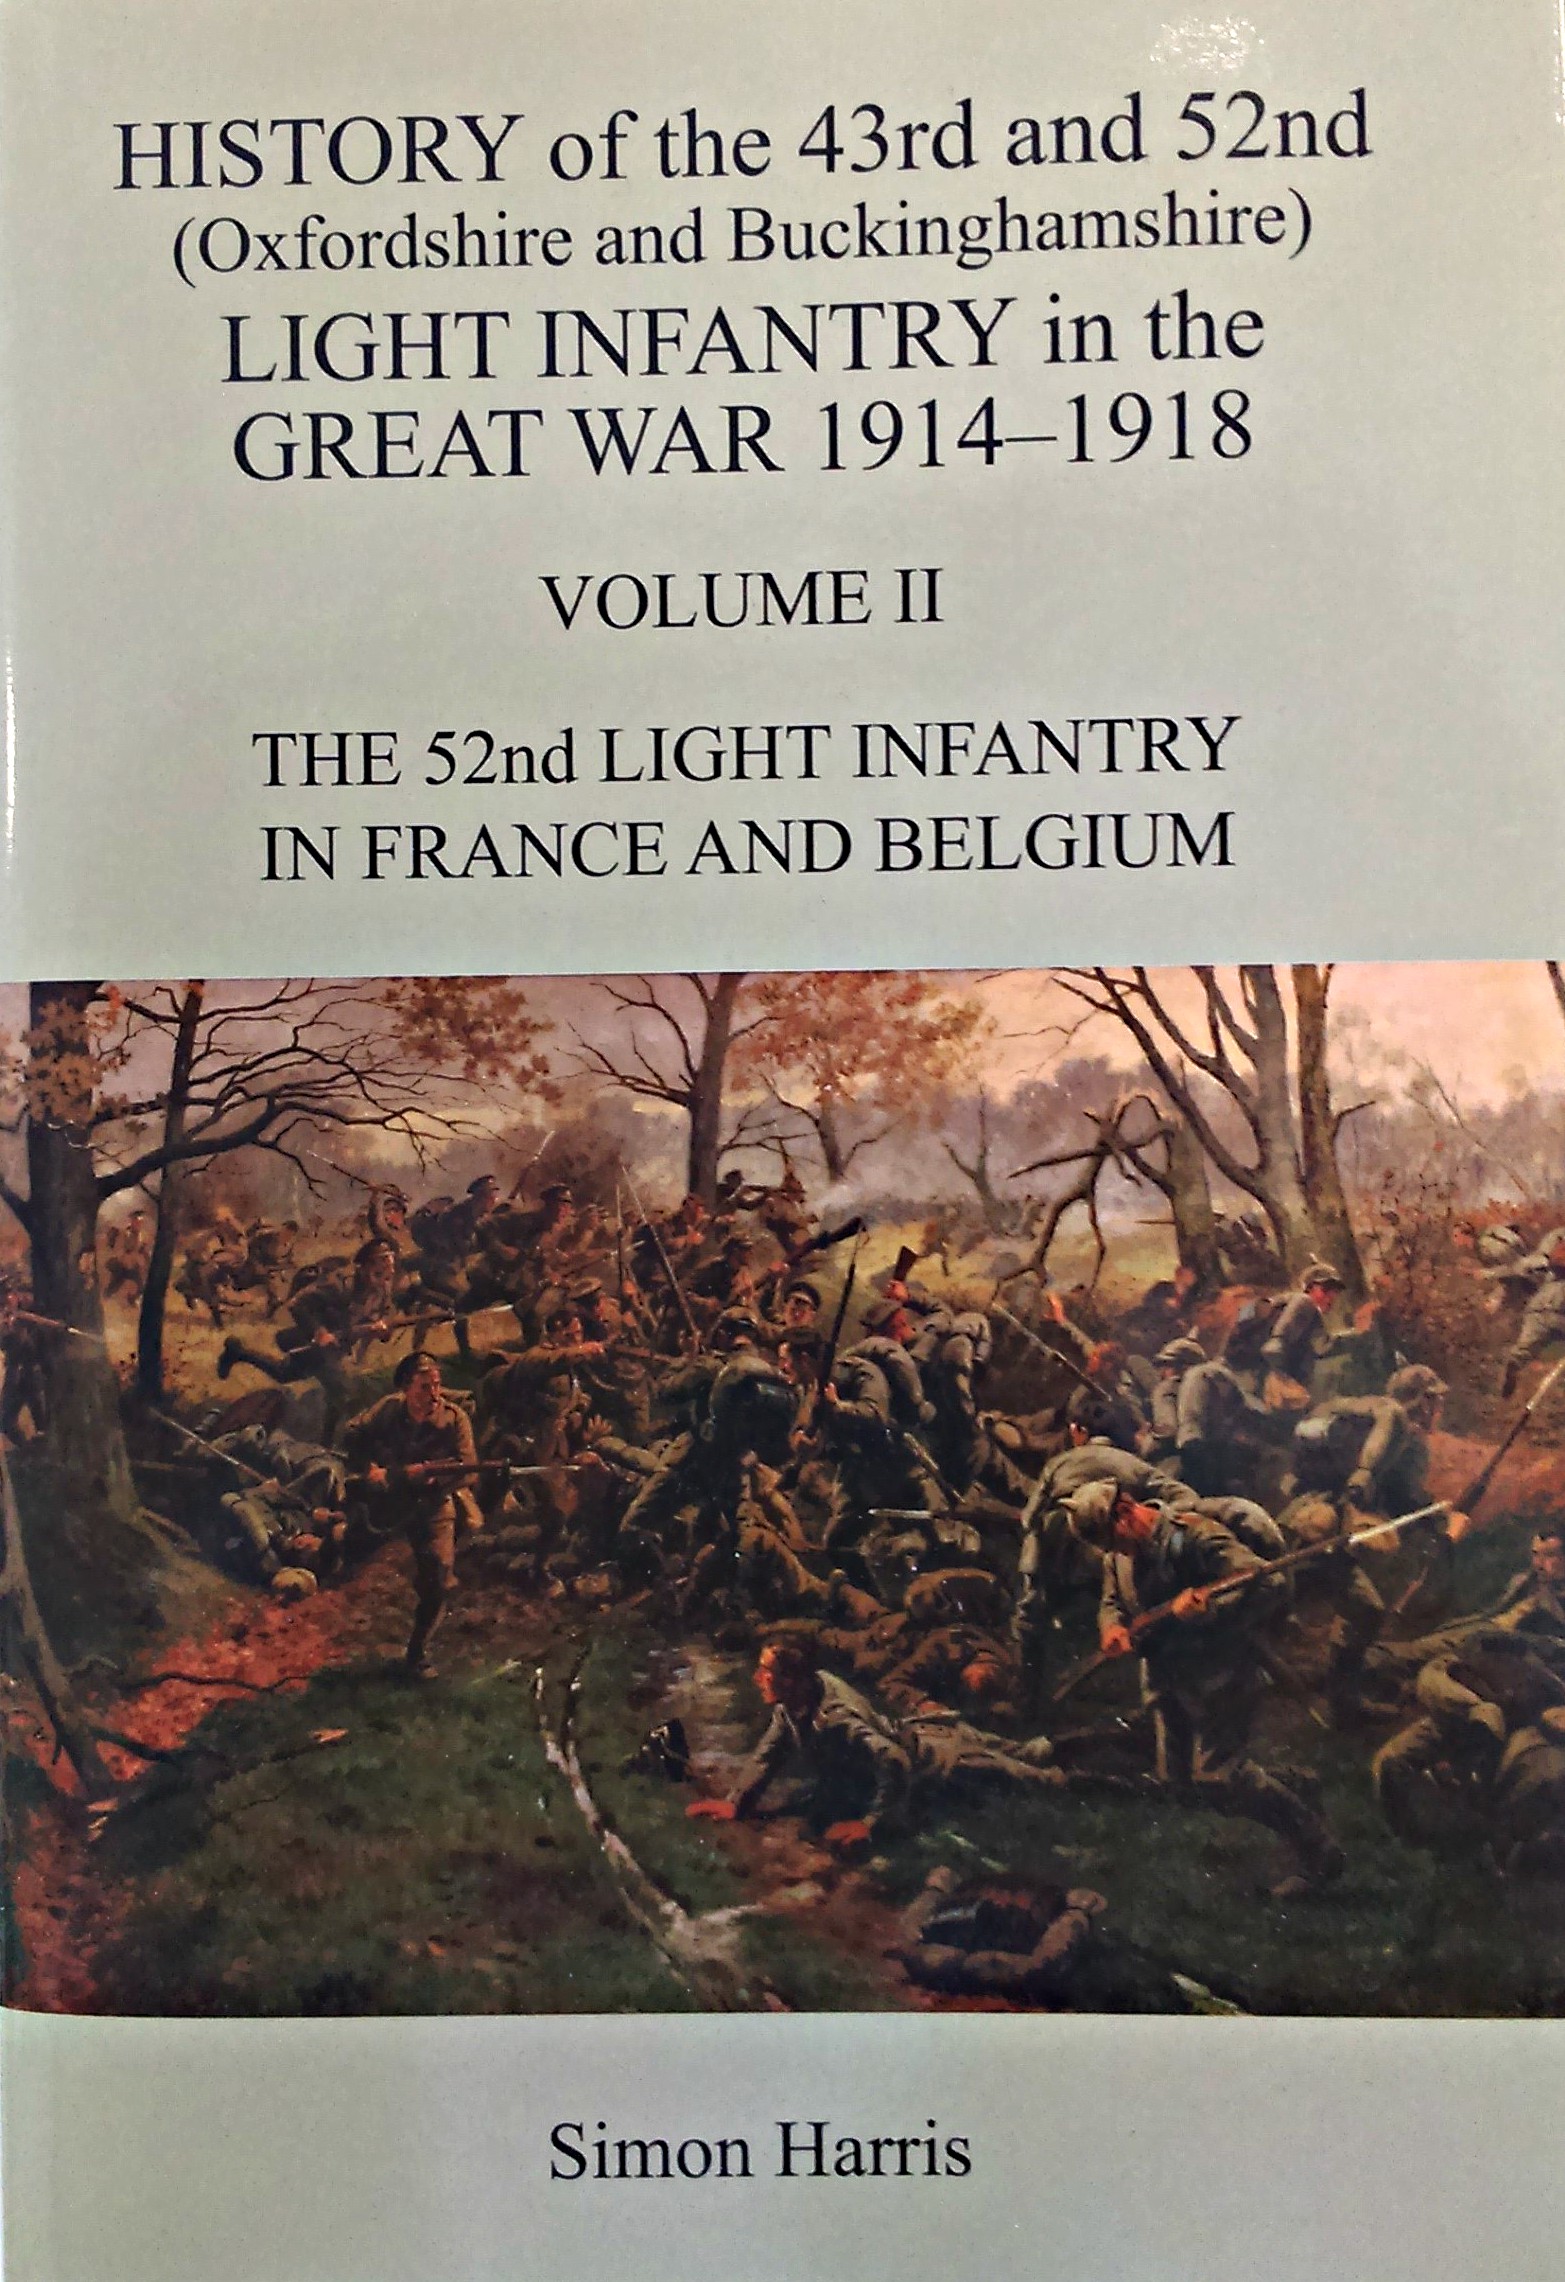 History of the 43rd and 52nd (Oxfordshire and Buckinghamshire) Light Infantry in the Great War 1914-1918 Volume II The 52nd Light Infantry in France and Belgium